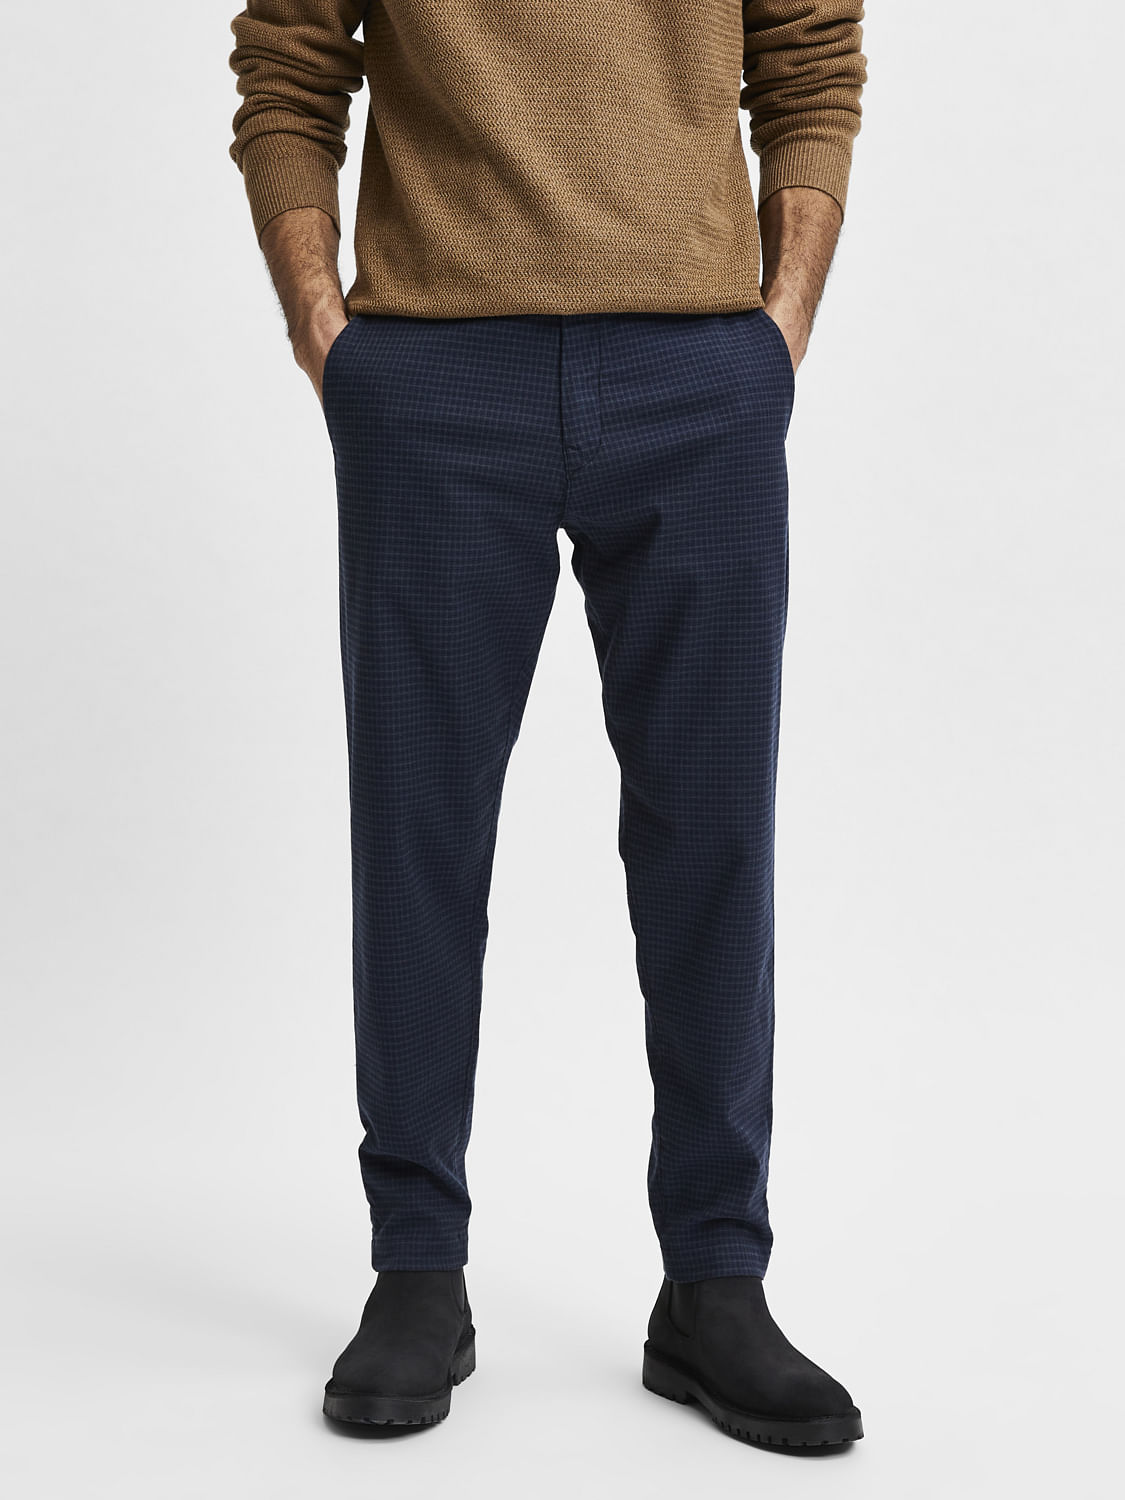 Buy Navy Blue Trousers online in India  Hirawats